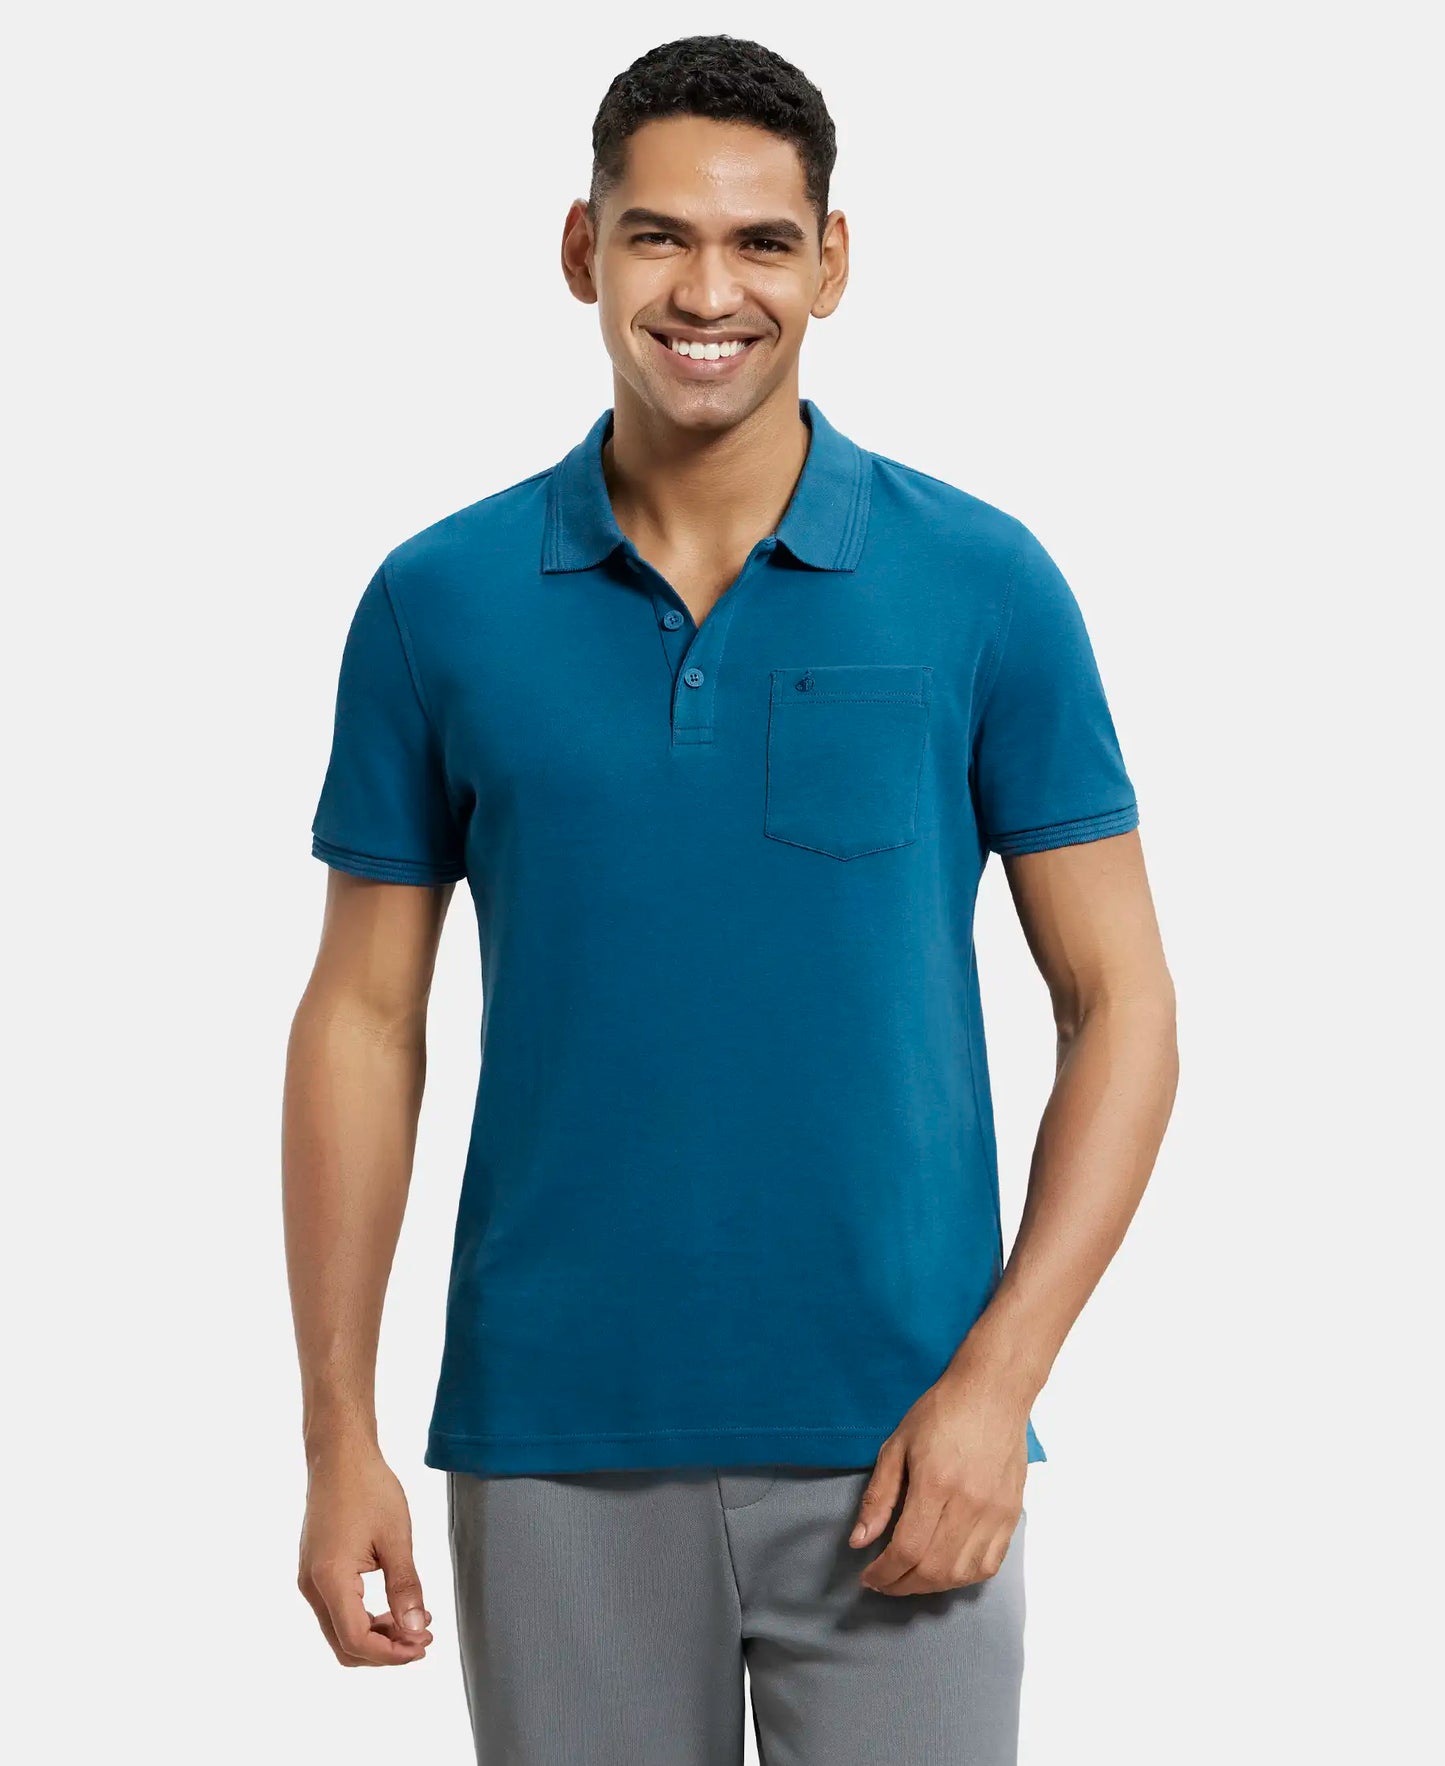 Super Combed Cotton Rich Solid Half Sleeve Polo T-Shirt with Chest Pocket - Seaport Teal-1